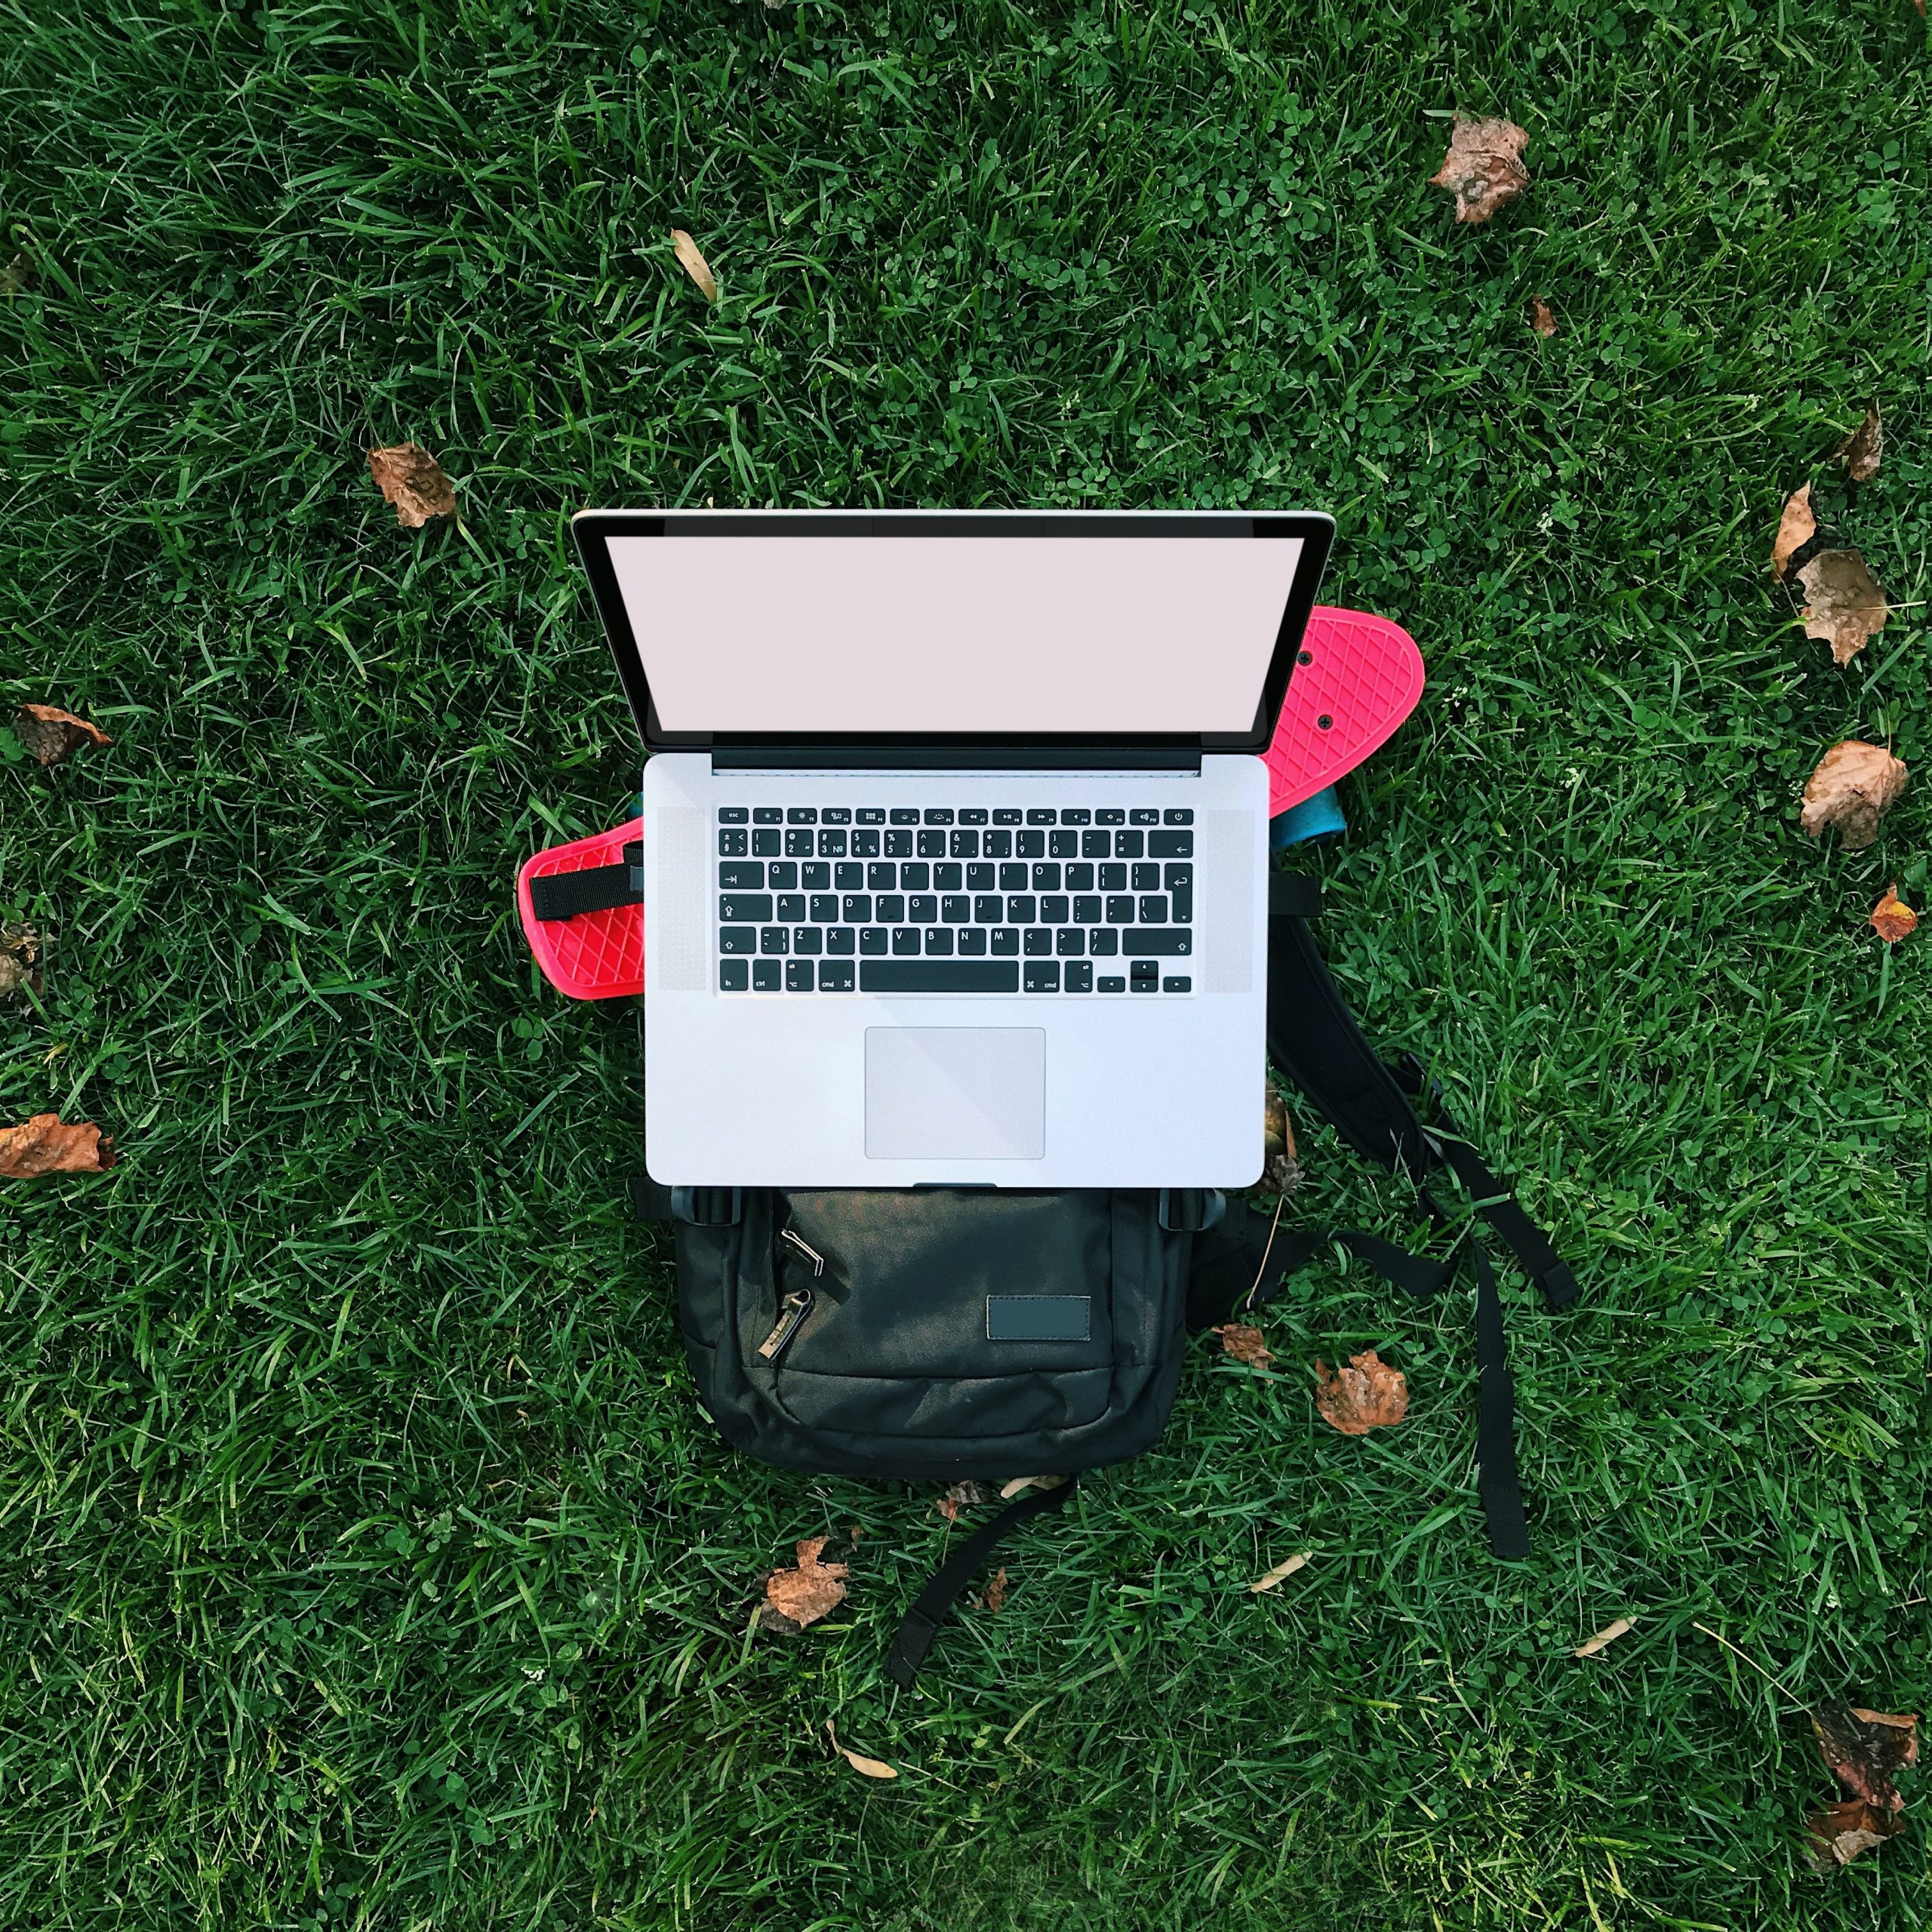 Laptop on top of skateboard and backpack on grass background